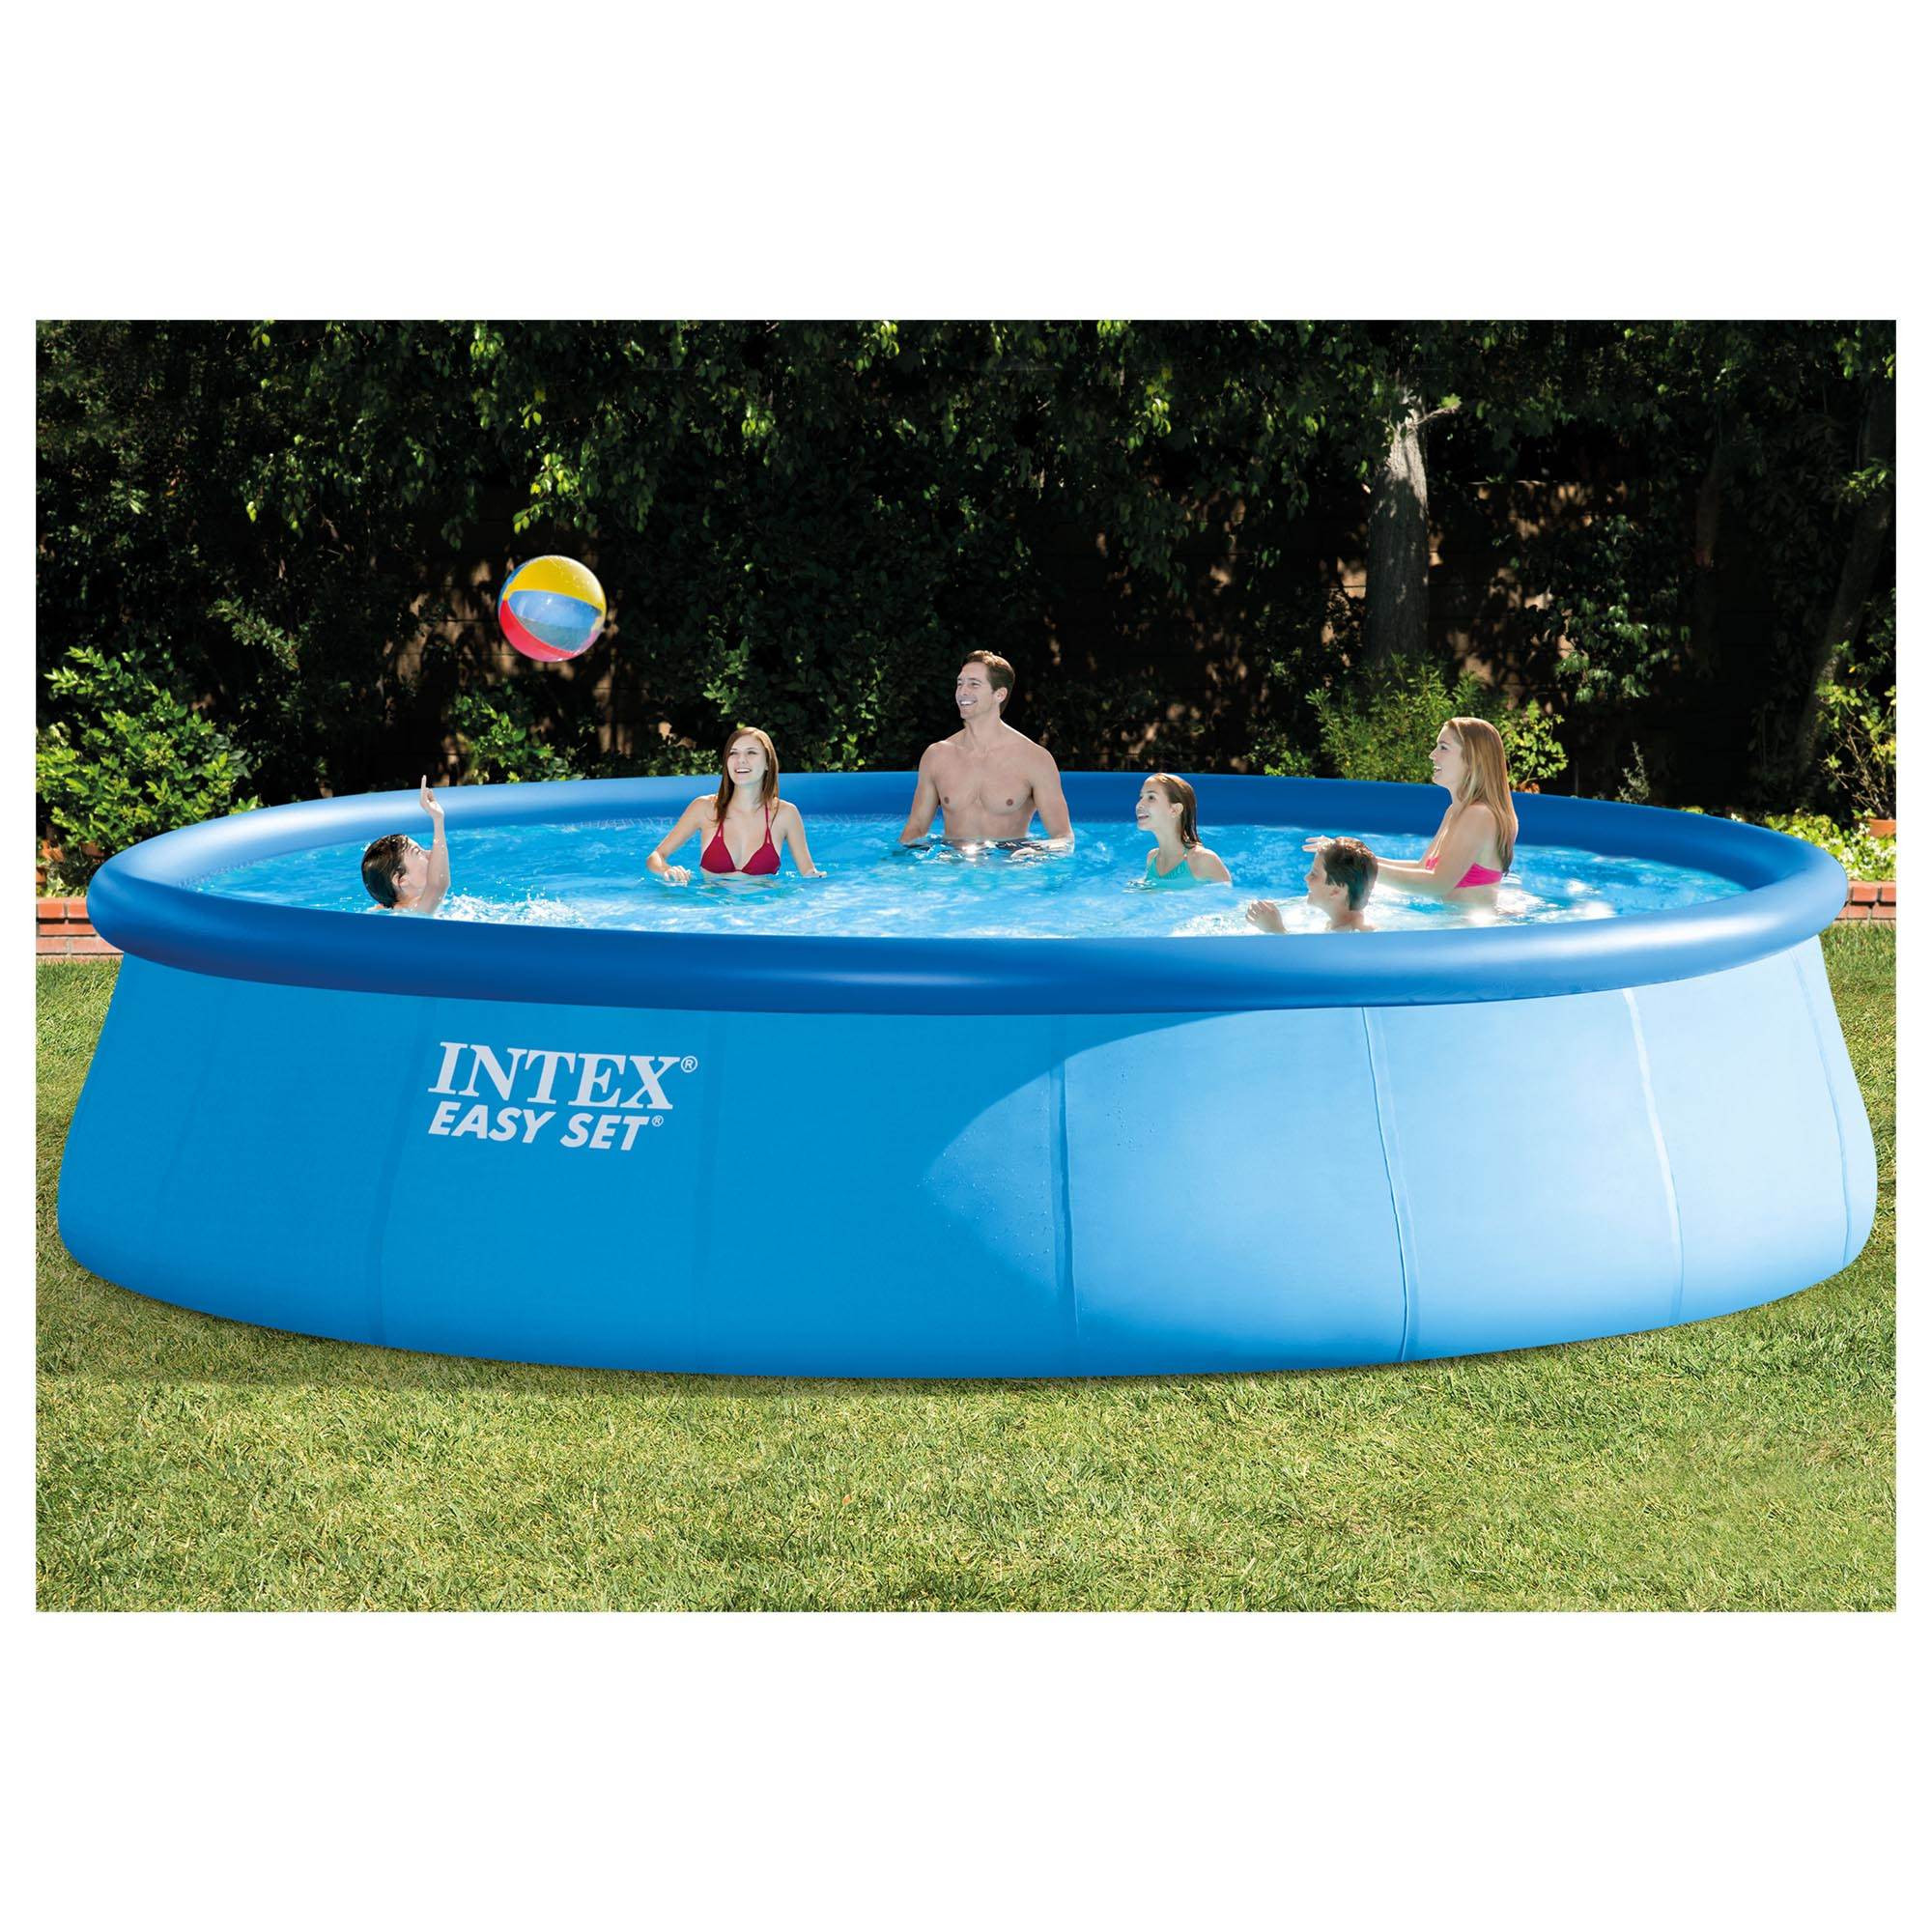 Intex Pool Accessories Above Ground
 Intex 18Ft x 48In Inflatable Round Ground Swimming